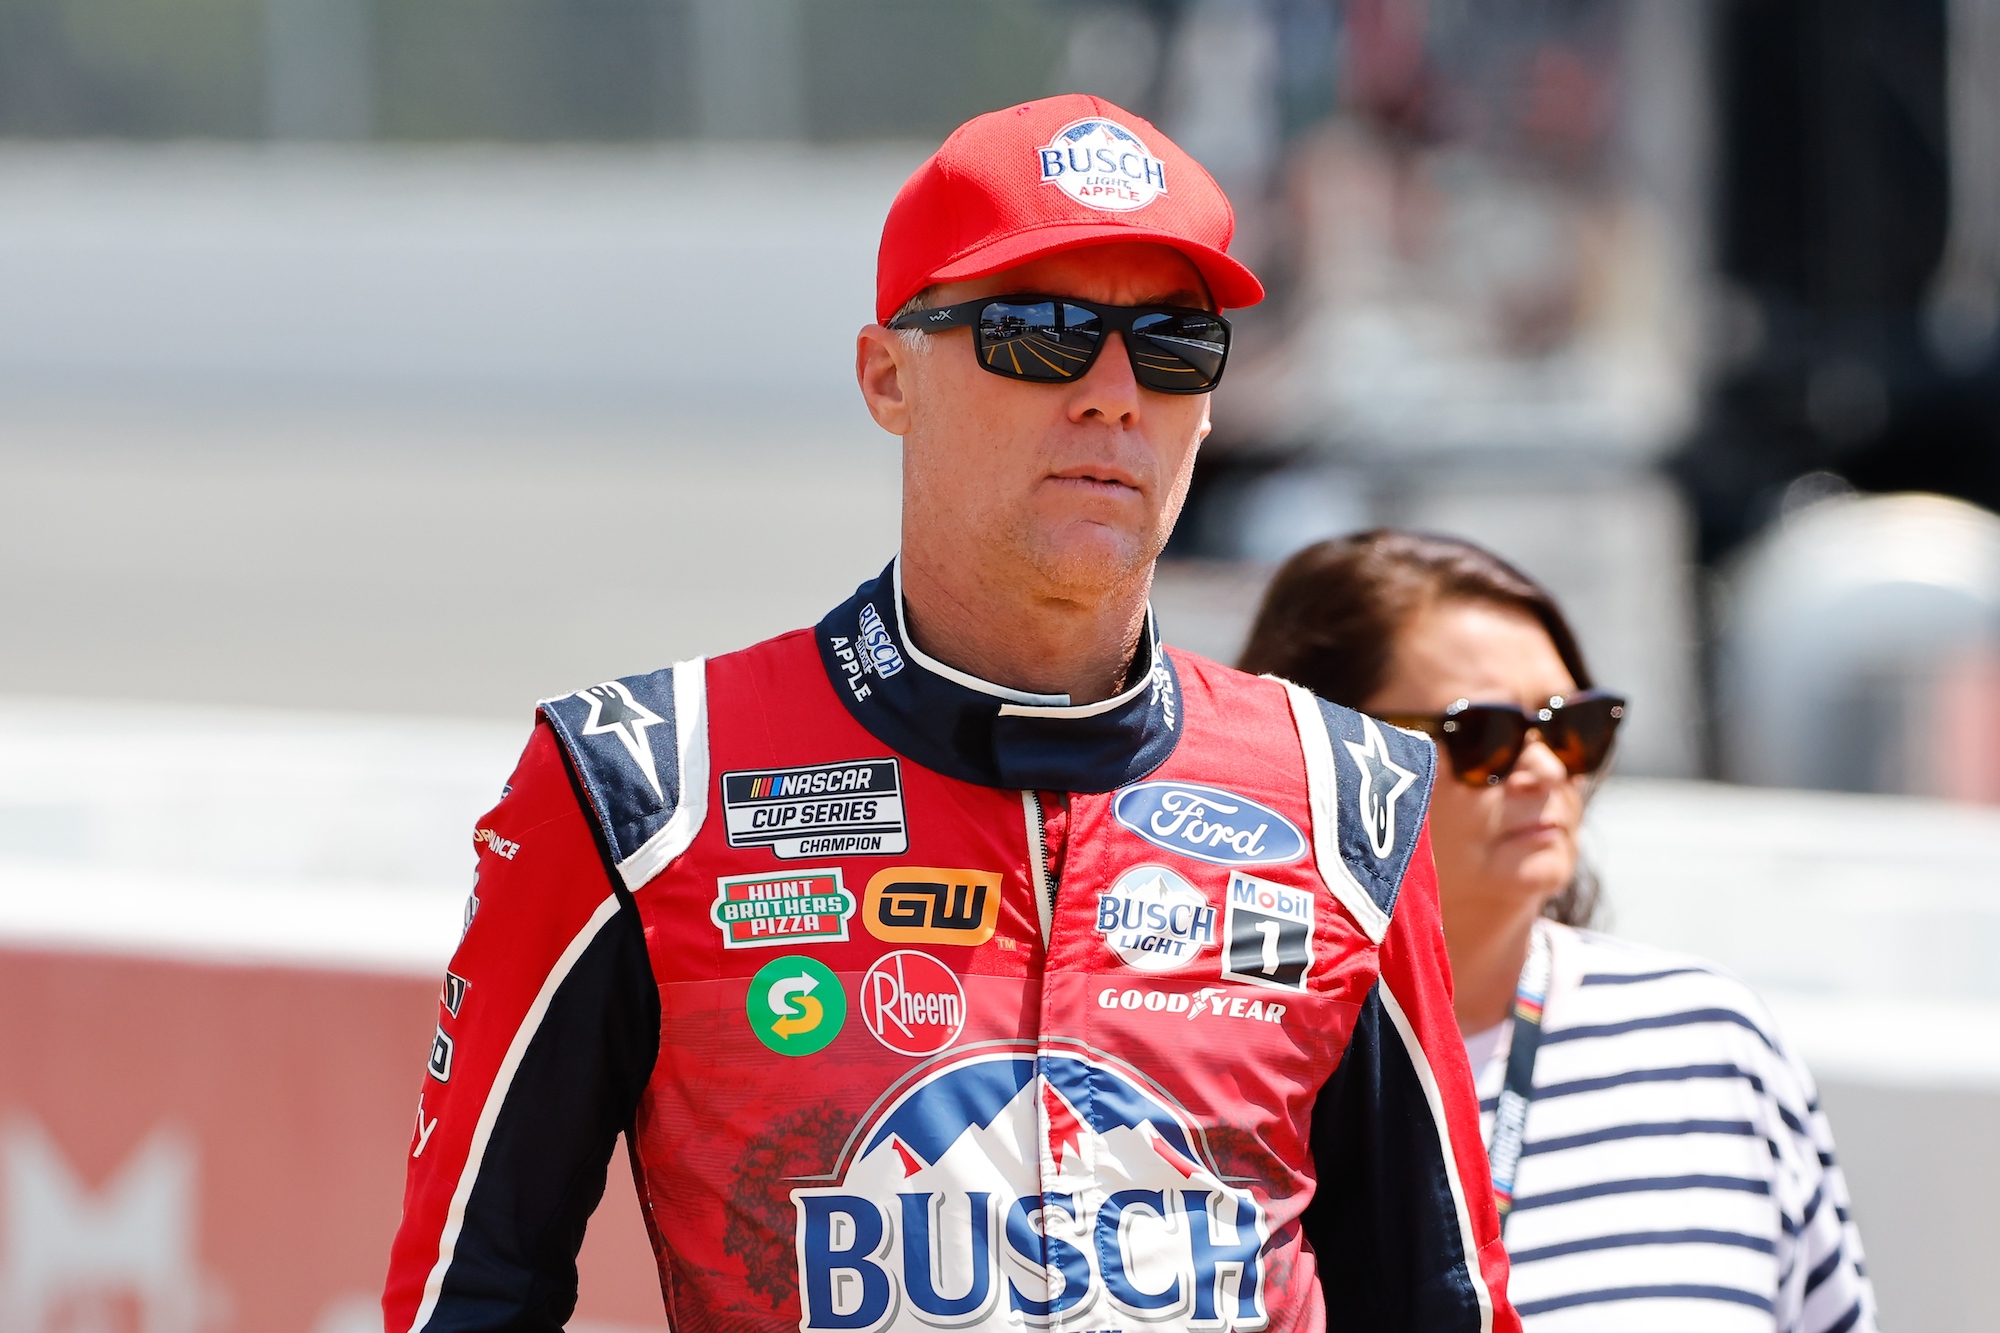 Kevin Harvick Doesn’t Mince Words on NASCAR and Next Gen Car, Suggesting Driver Safety Isn’t Top Priority